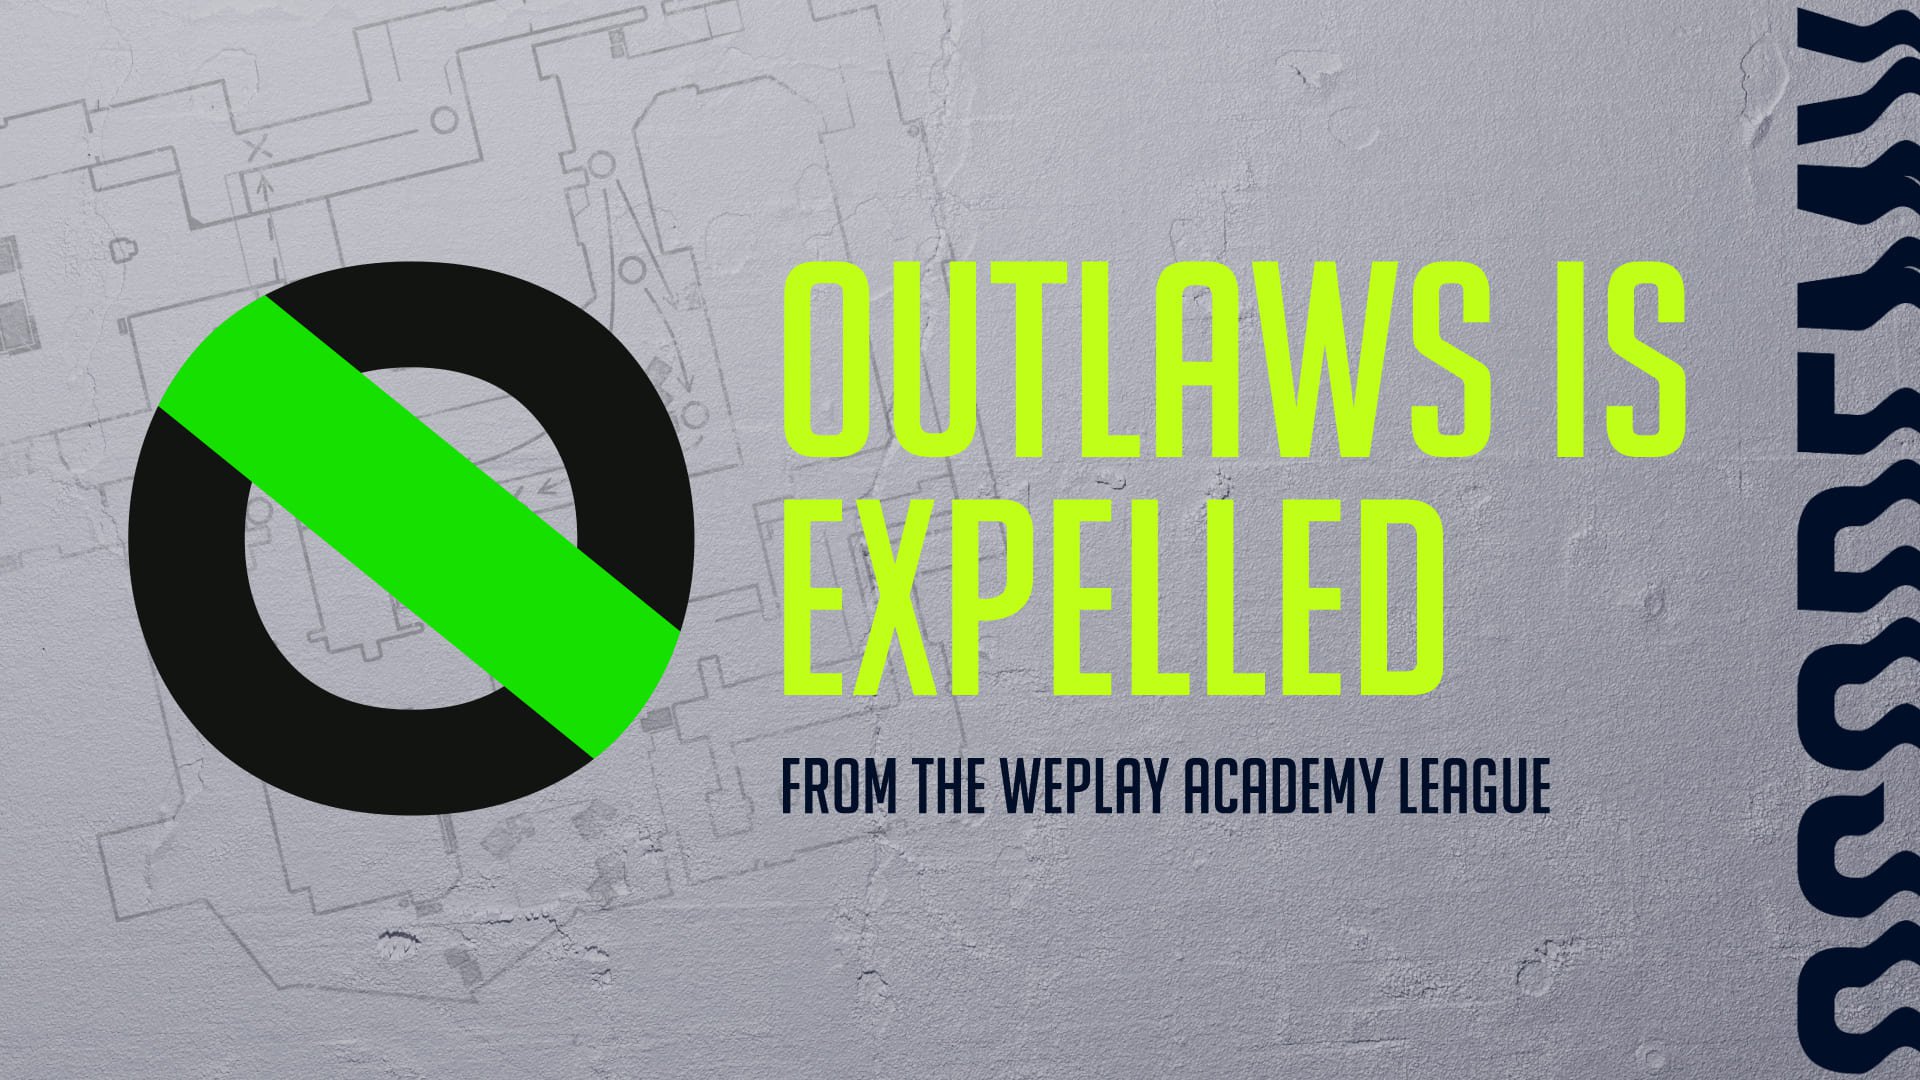 Statement on removal of team Outlaws from WePlay Academy League